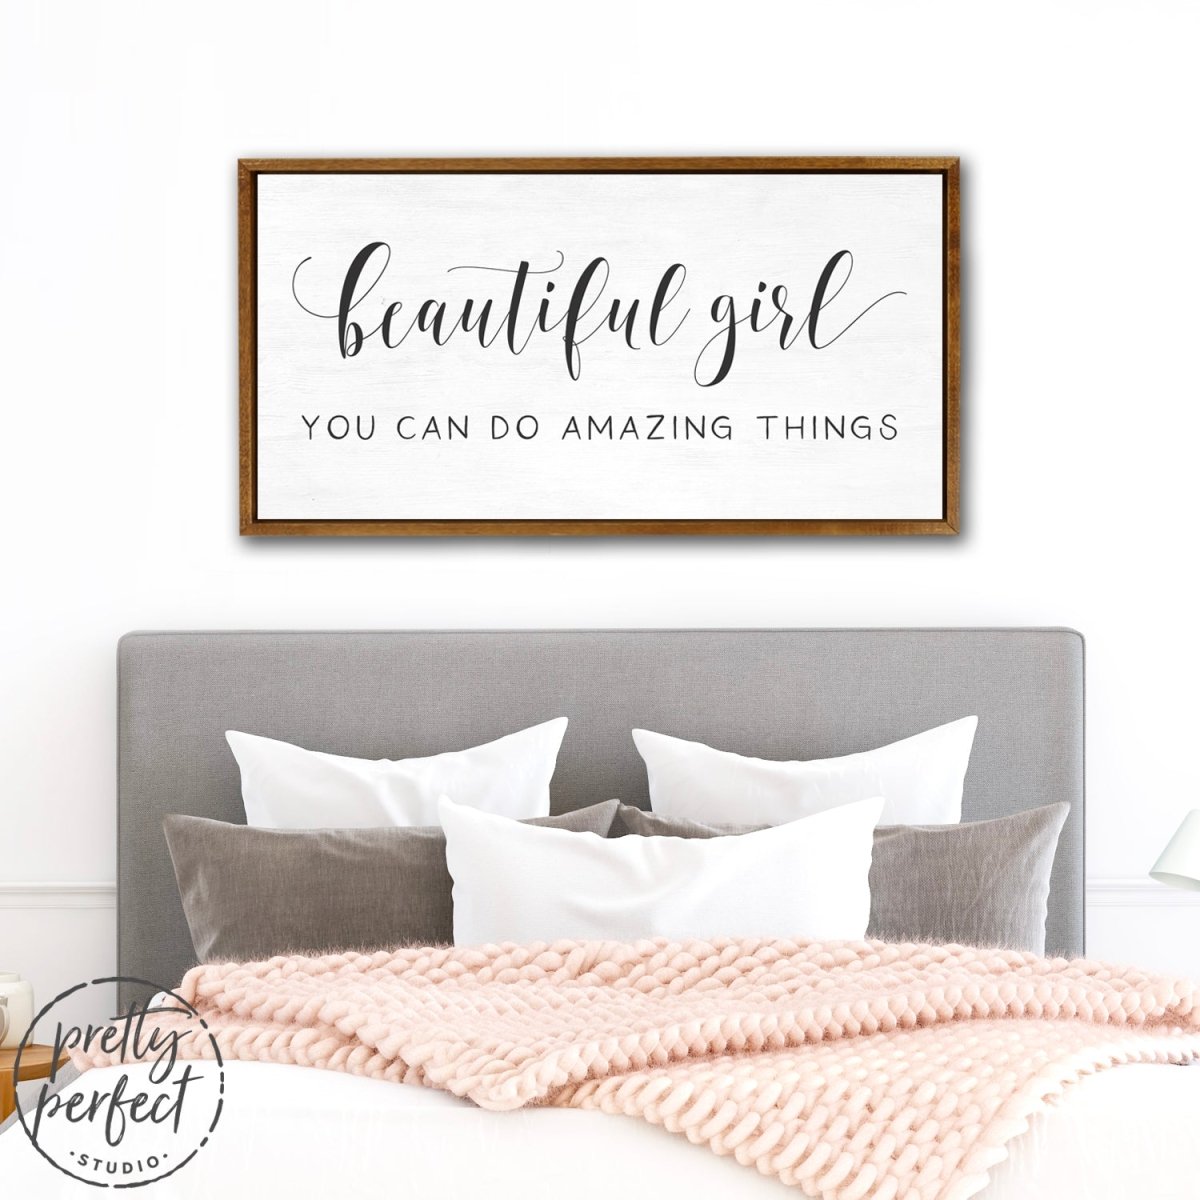 Beautiful Girl You Can Do Amazing Things Sign Hanging Above Bed in Bedroom - Pretty Perfect Studio